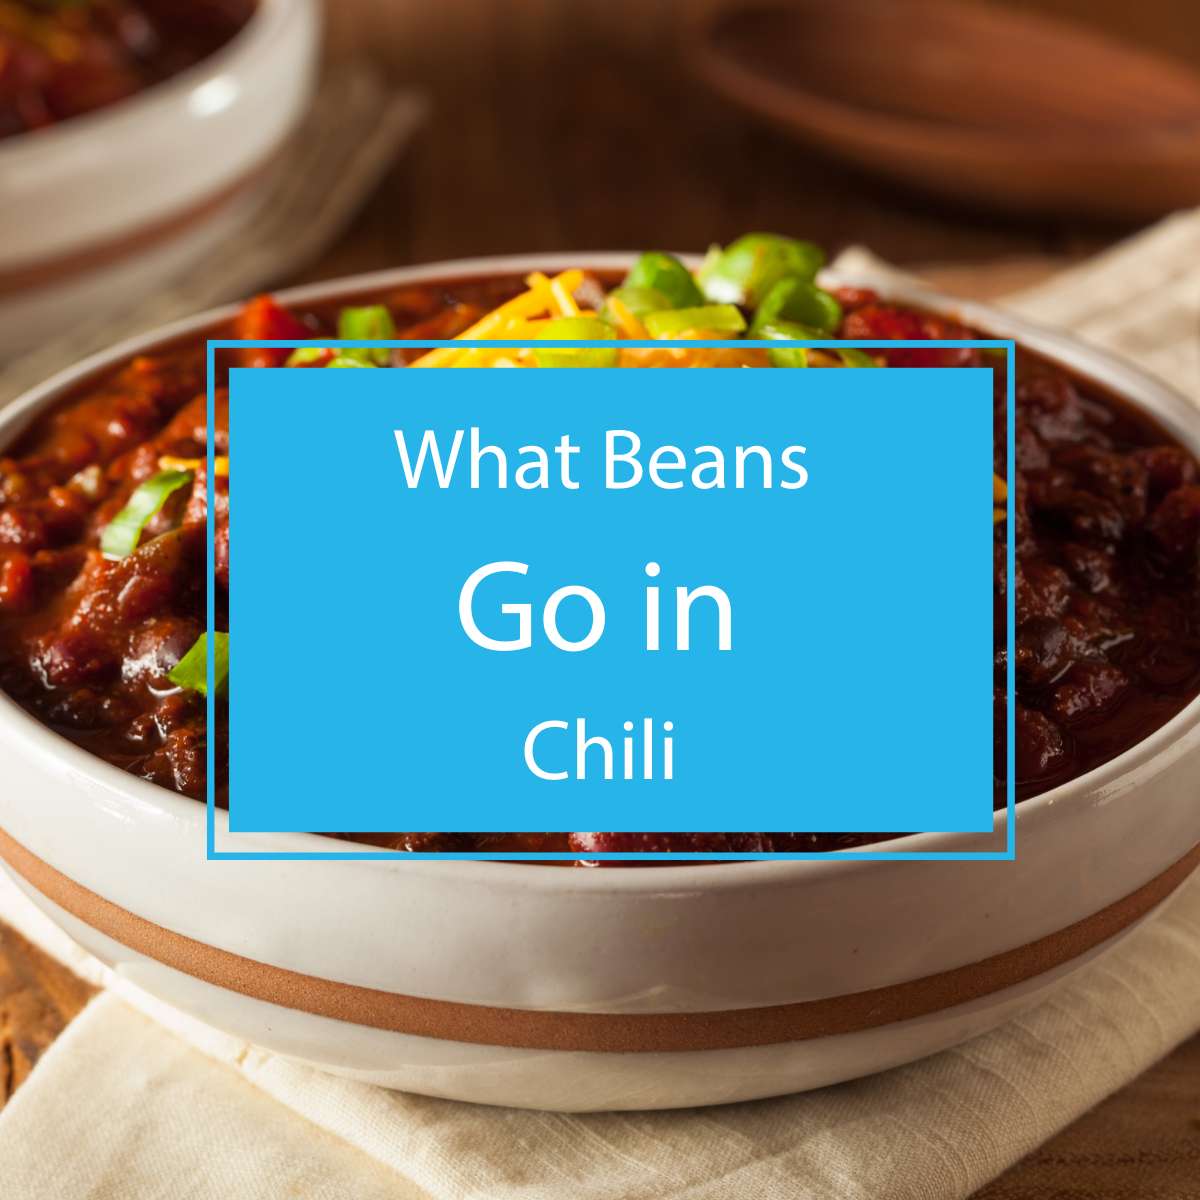 What Beans Go in Chili